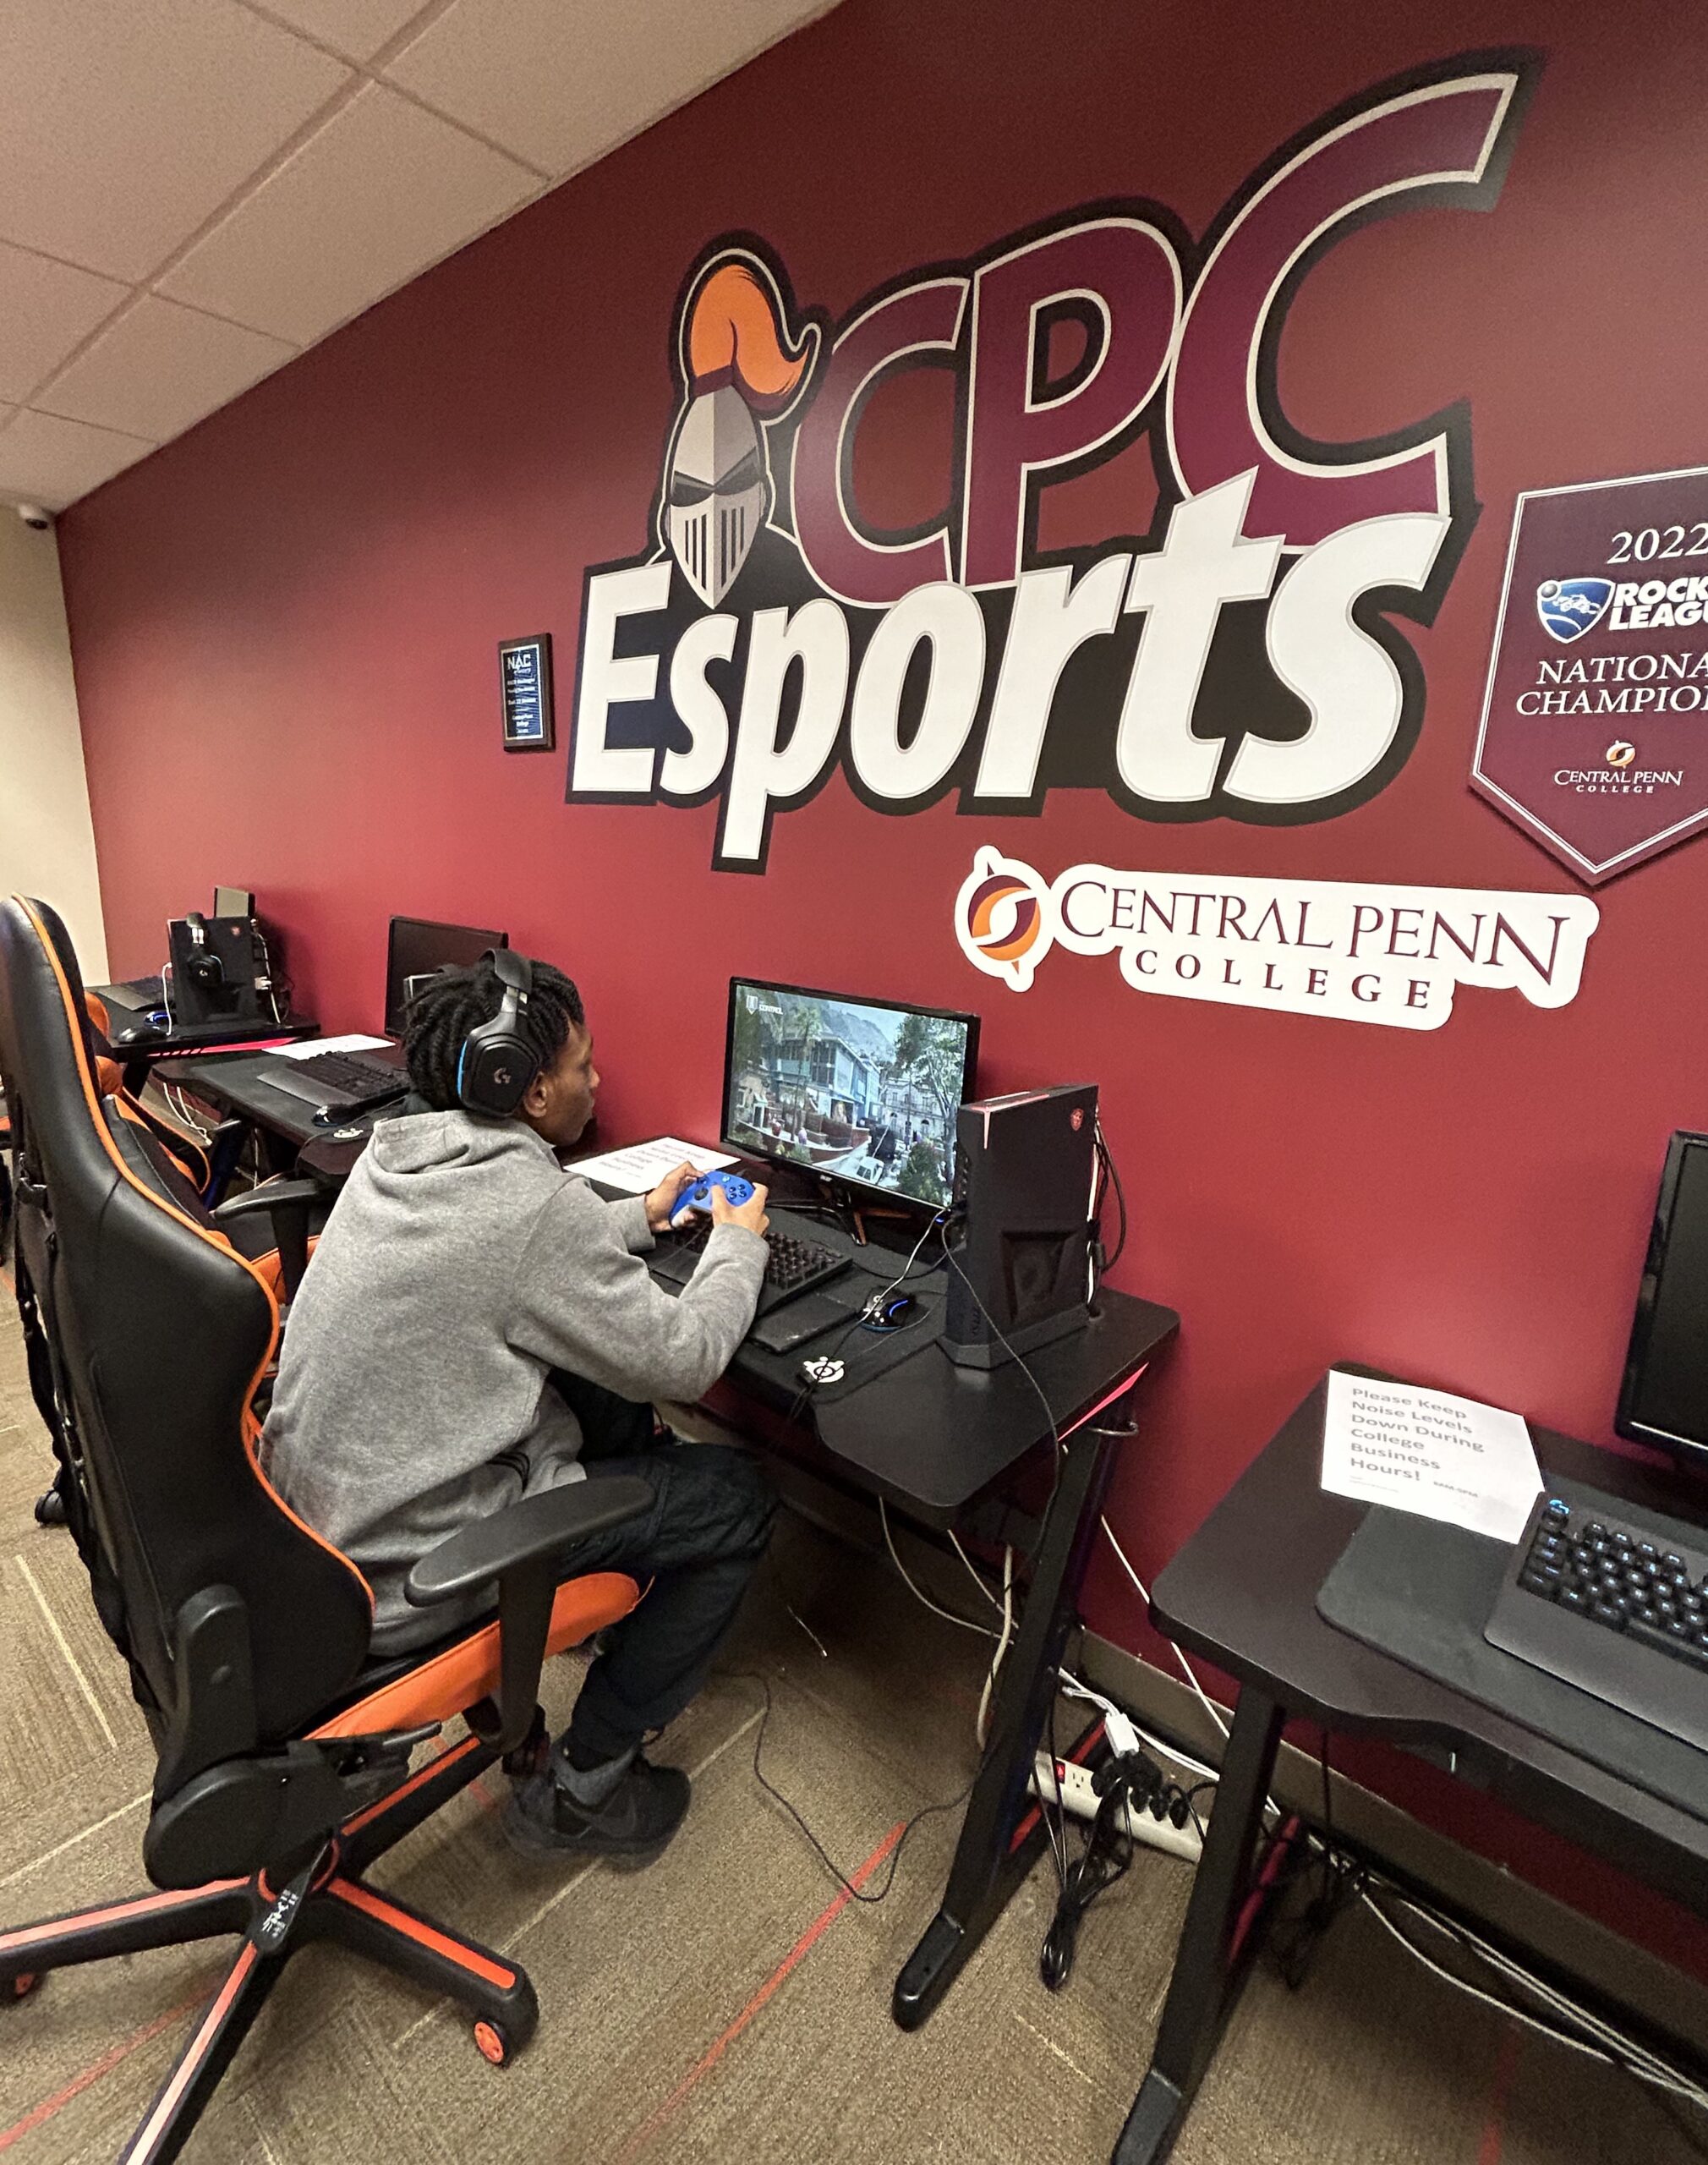 Young man in a gray sweatshirt seated in a gaming chair playing Call of Duty vanguard on a computer monitor. In front of him is a reddish-orange wall with the Central Penn knight logo (silver helmet with facemask and an orange plume on top of the helmet, and CPC Esports -- with the CPC in reddish-orange outlined in white and the Esports in bright white below the CPC, against a black background